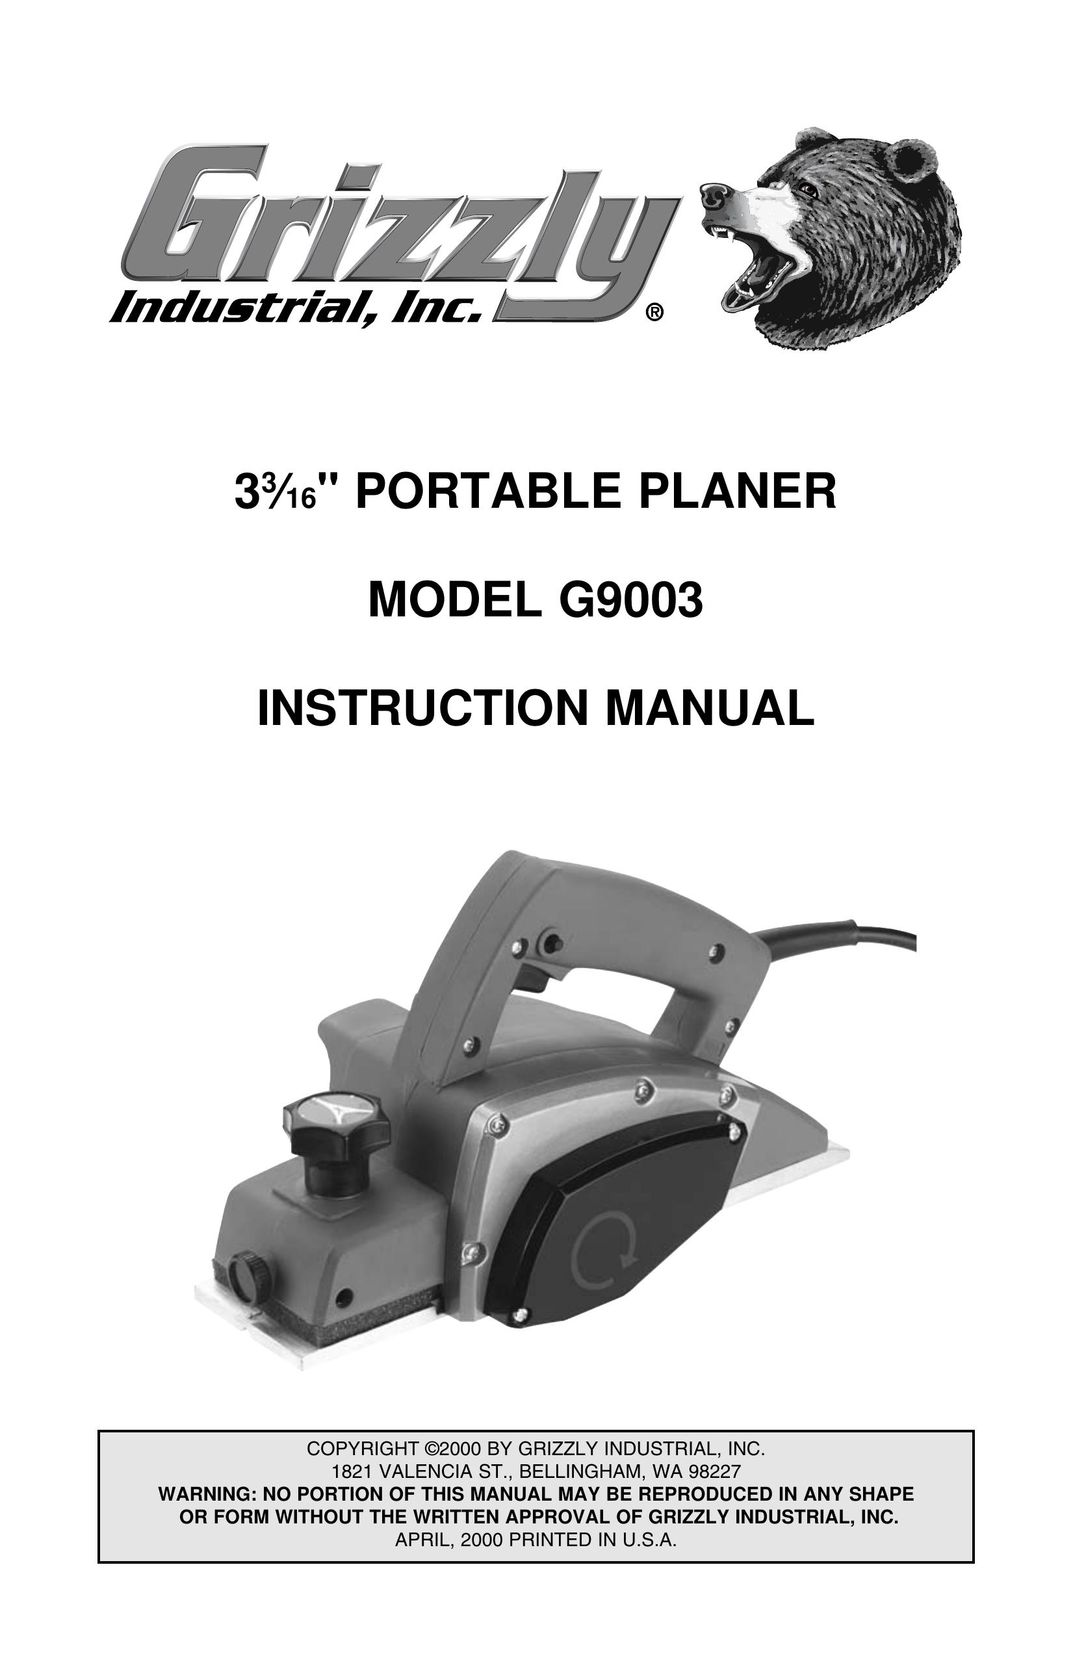 Grizzly G9003 Planer User Manual